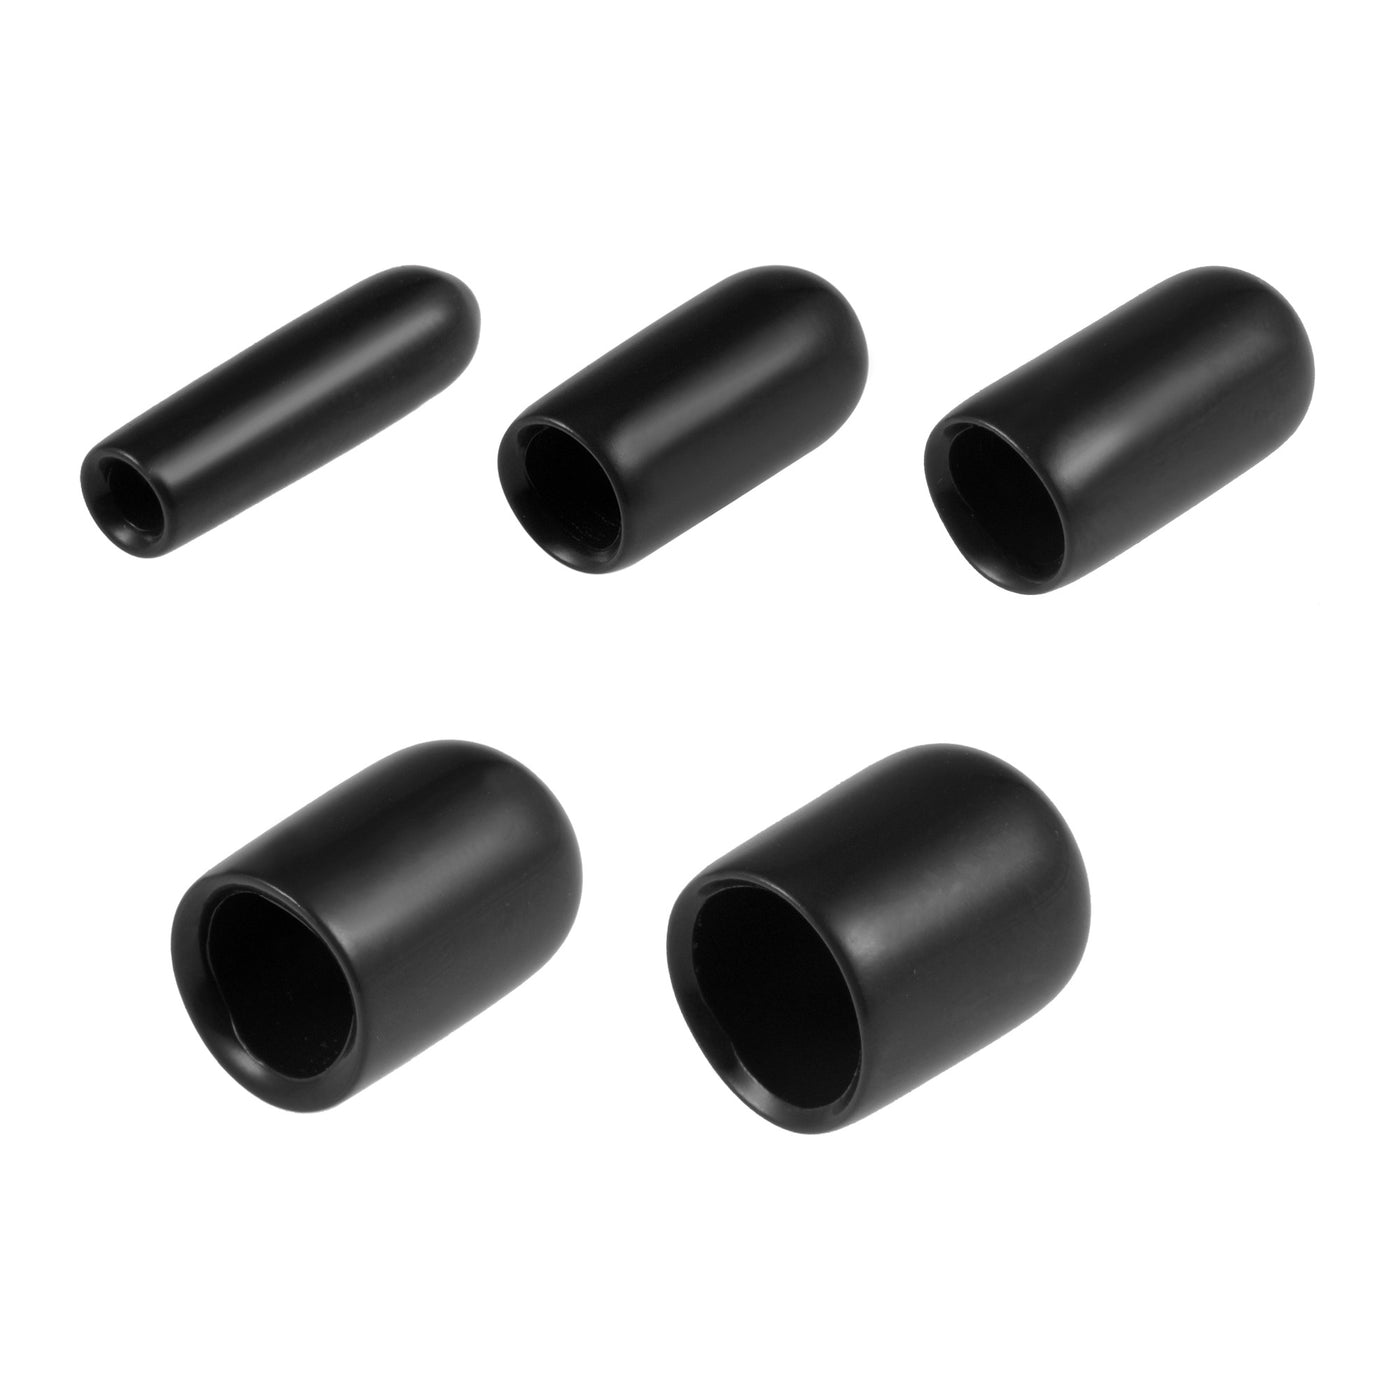 uxcell Uxcell Round Rubber End Caps Vinyl Cover Screw Thread Protector Assortment Kits